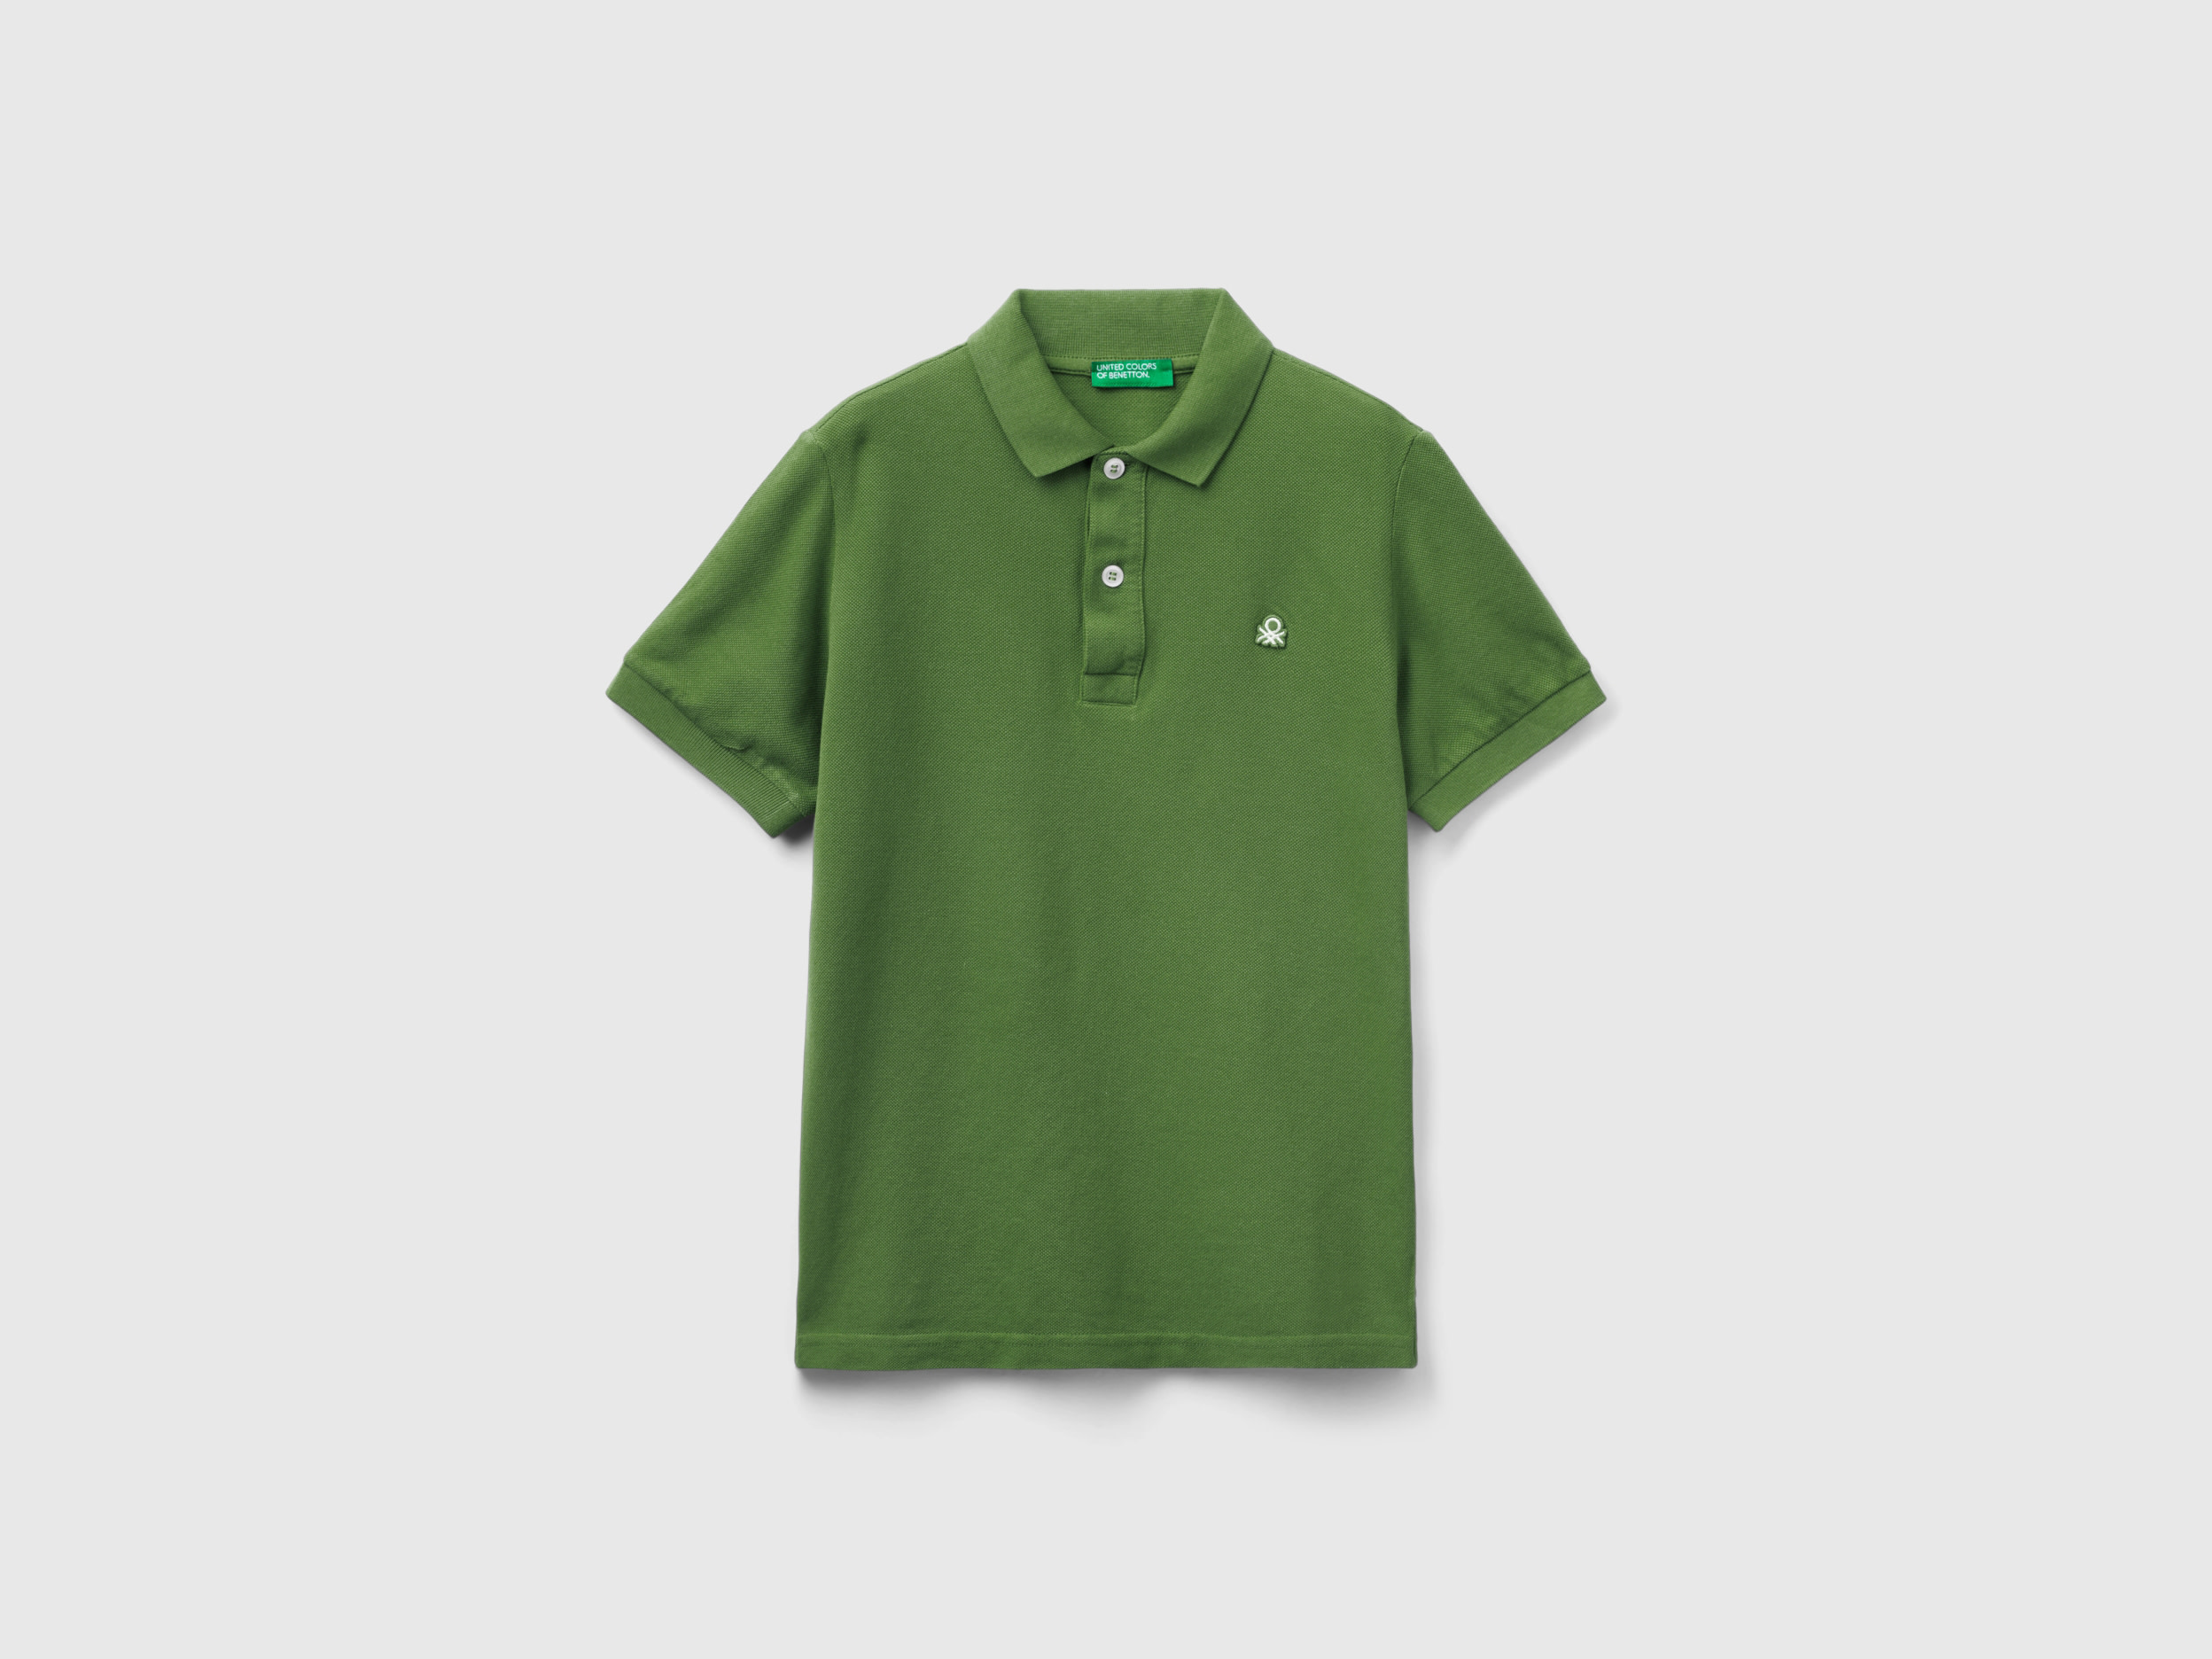 Image of Benetton, Slim Fit Polo In 100% Organic Cotton, size 2XL, Green, Kids